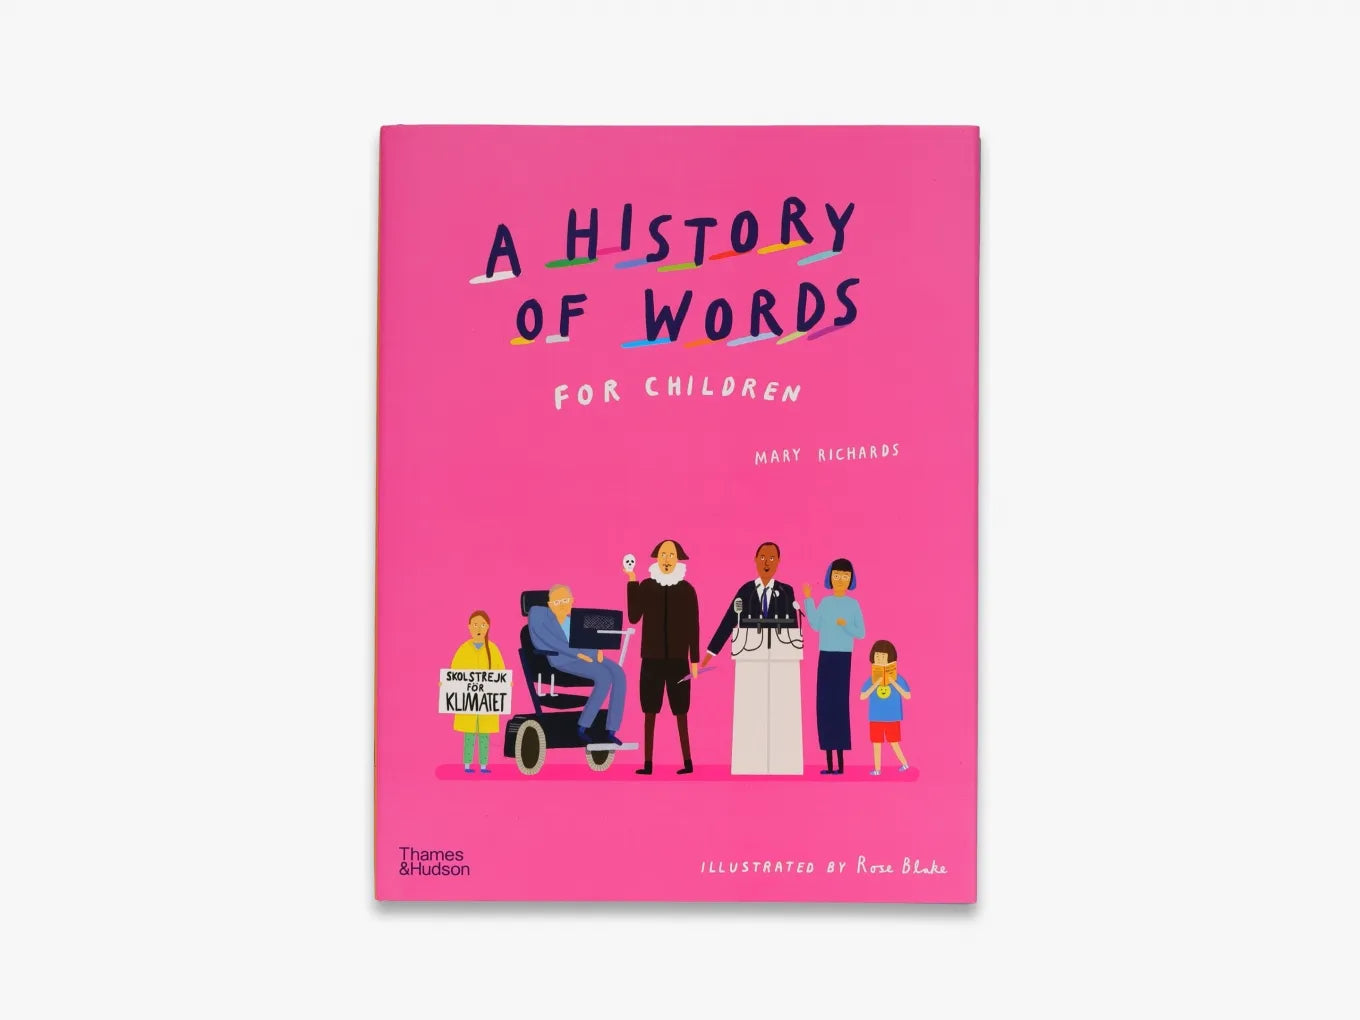 A History of Words for Children by Mary Richards & Rose Blake